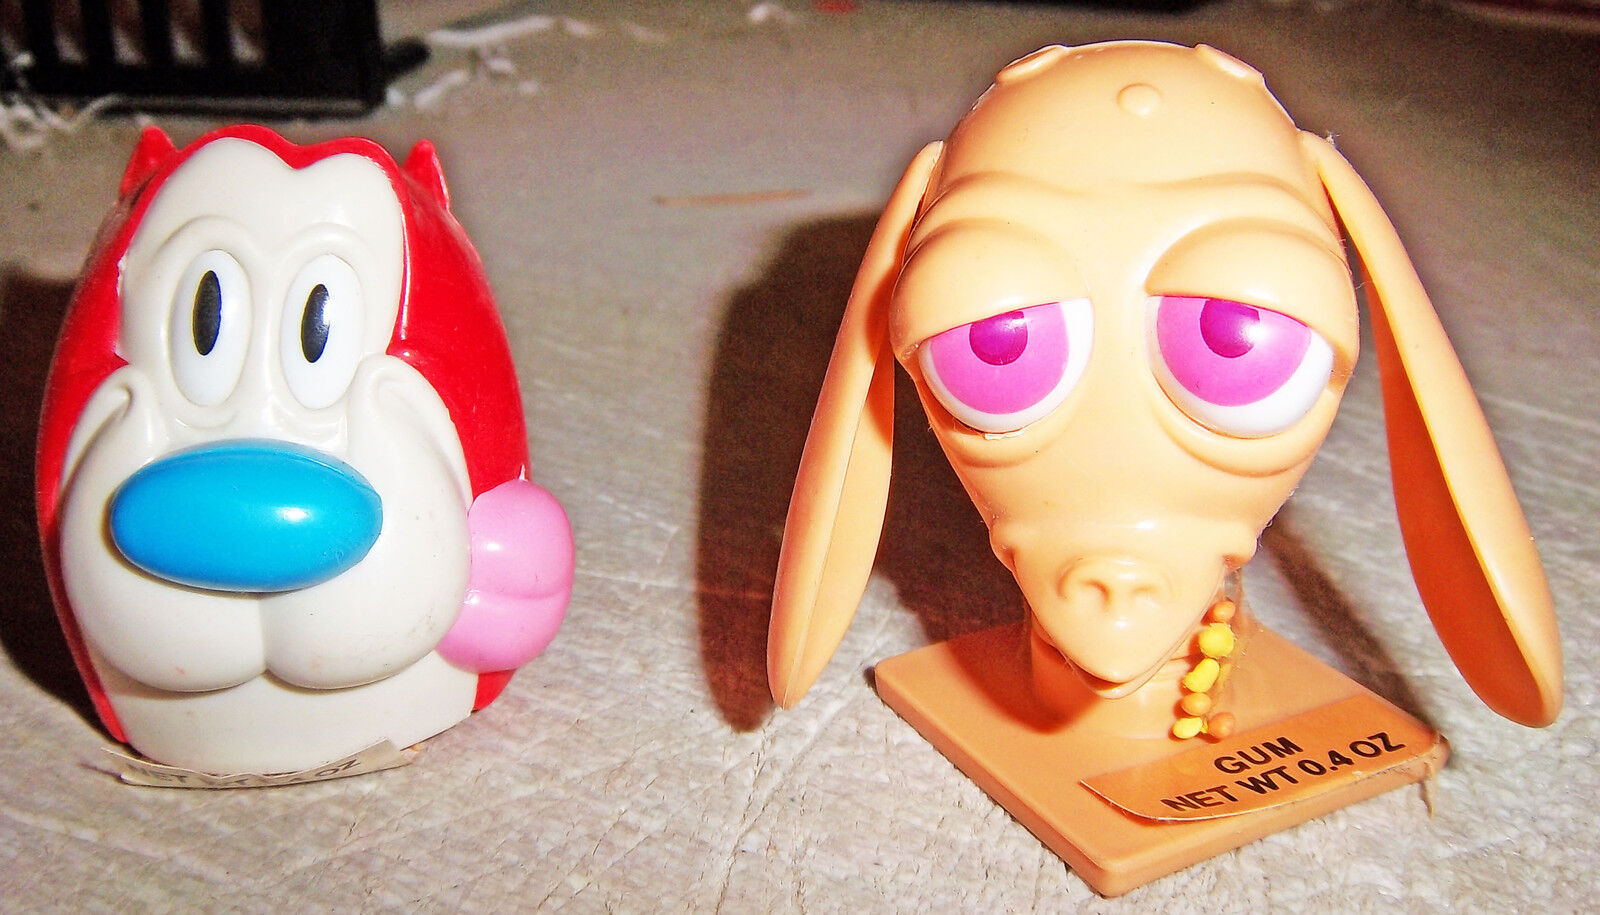  2 dif Ren & Stimpy  Topps Candy Figures approx 2 inches tall each